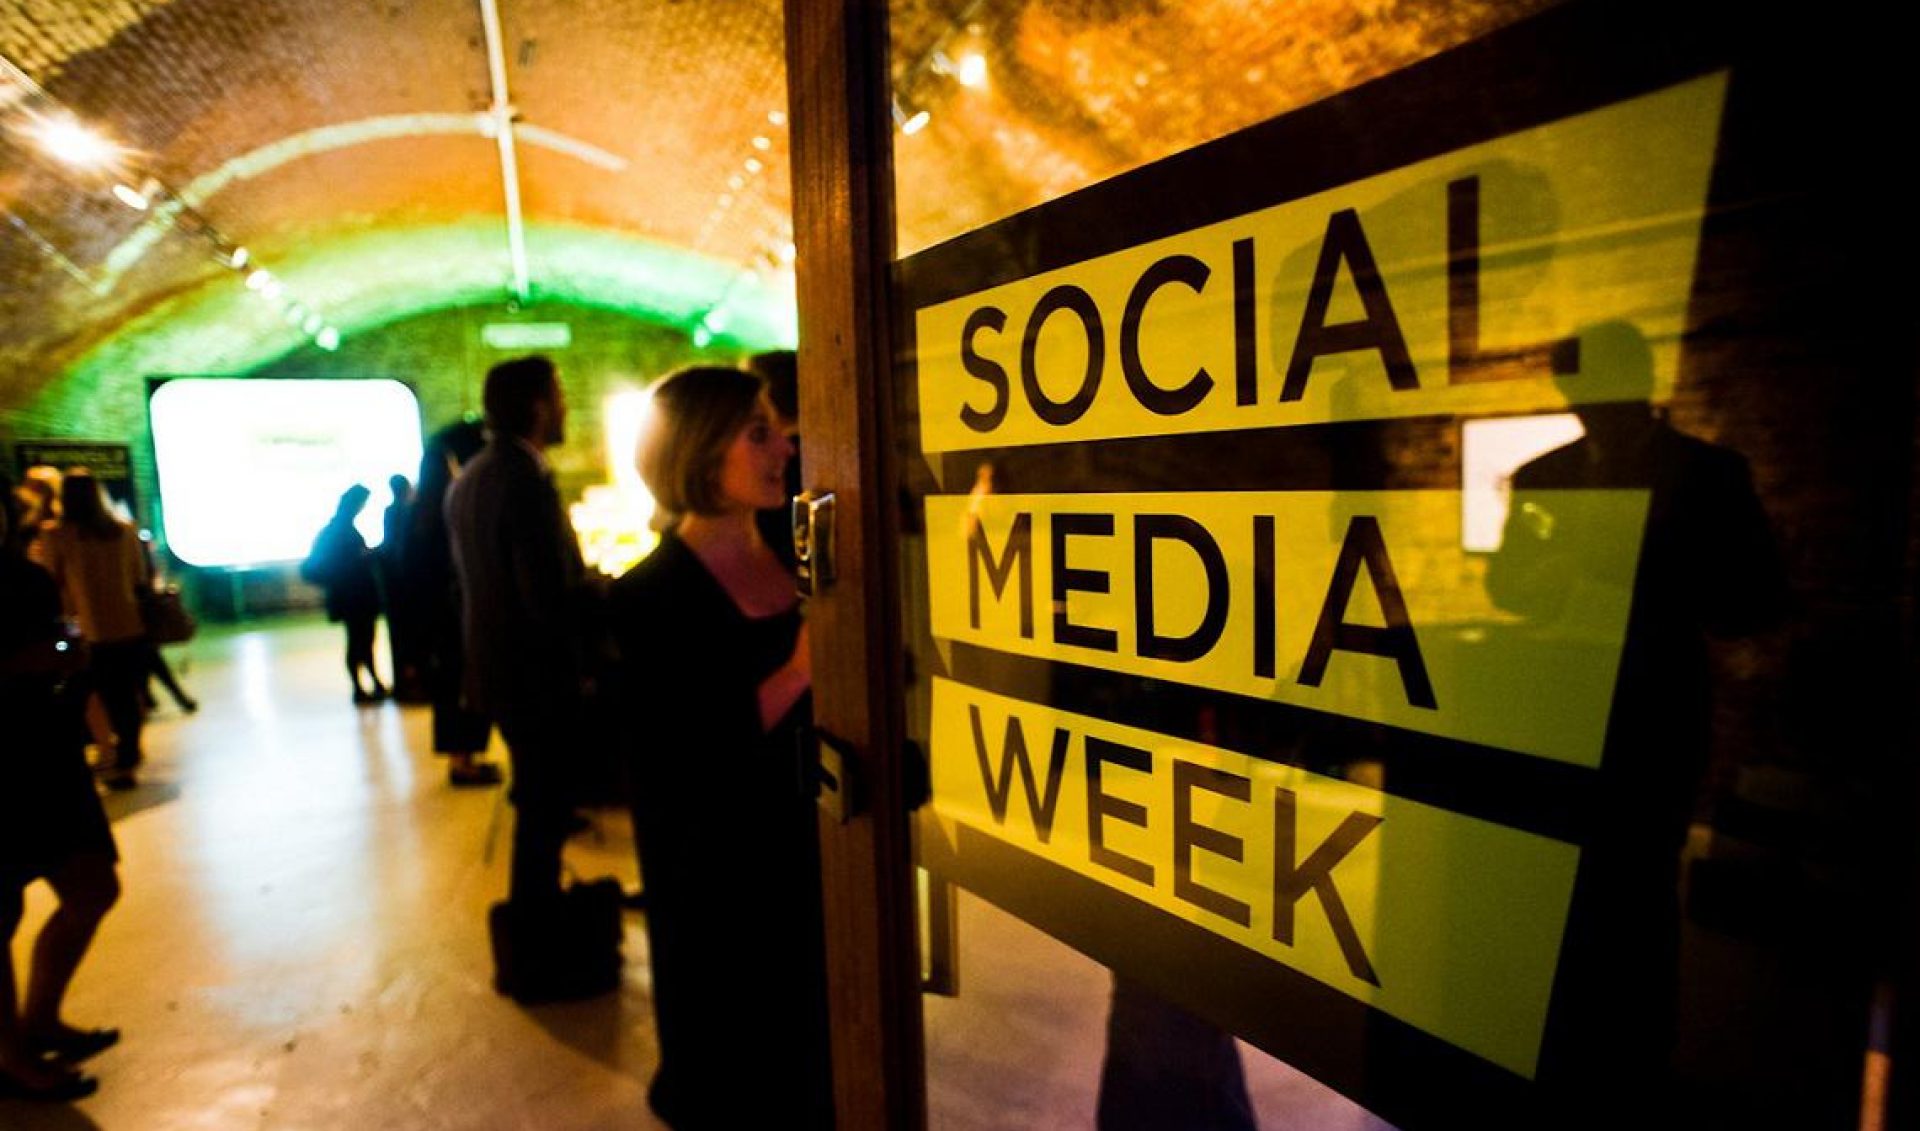 Social Media Week Los Angeles Is June 8 – 12, Here’s What You Can Expect